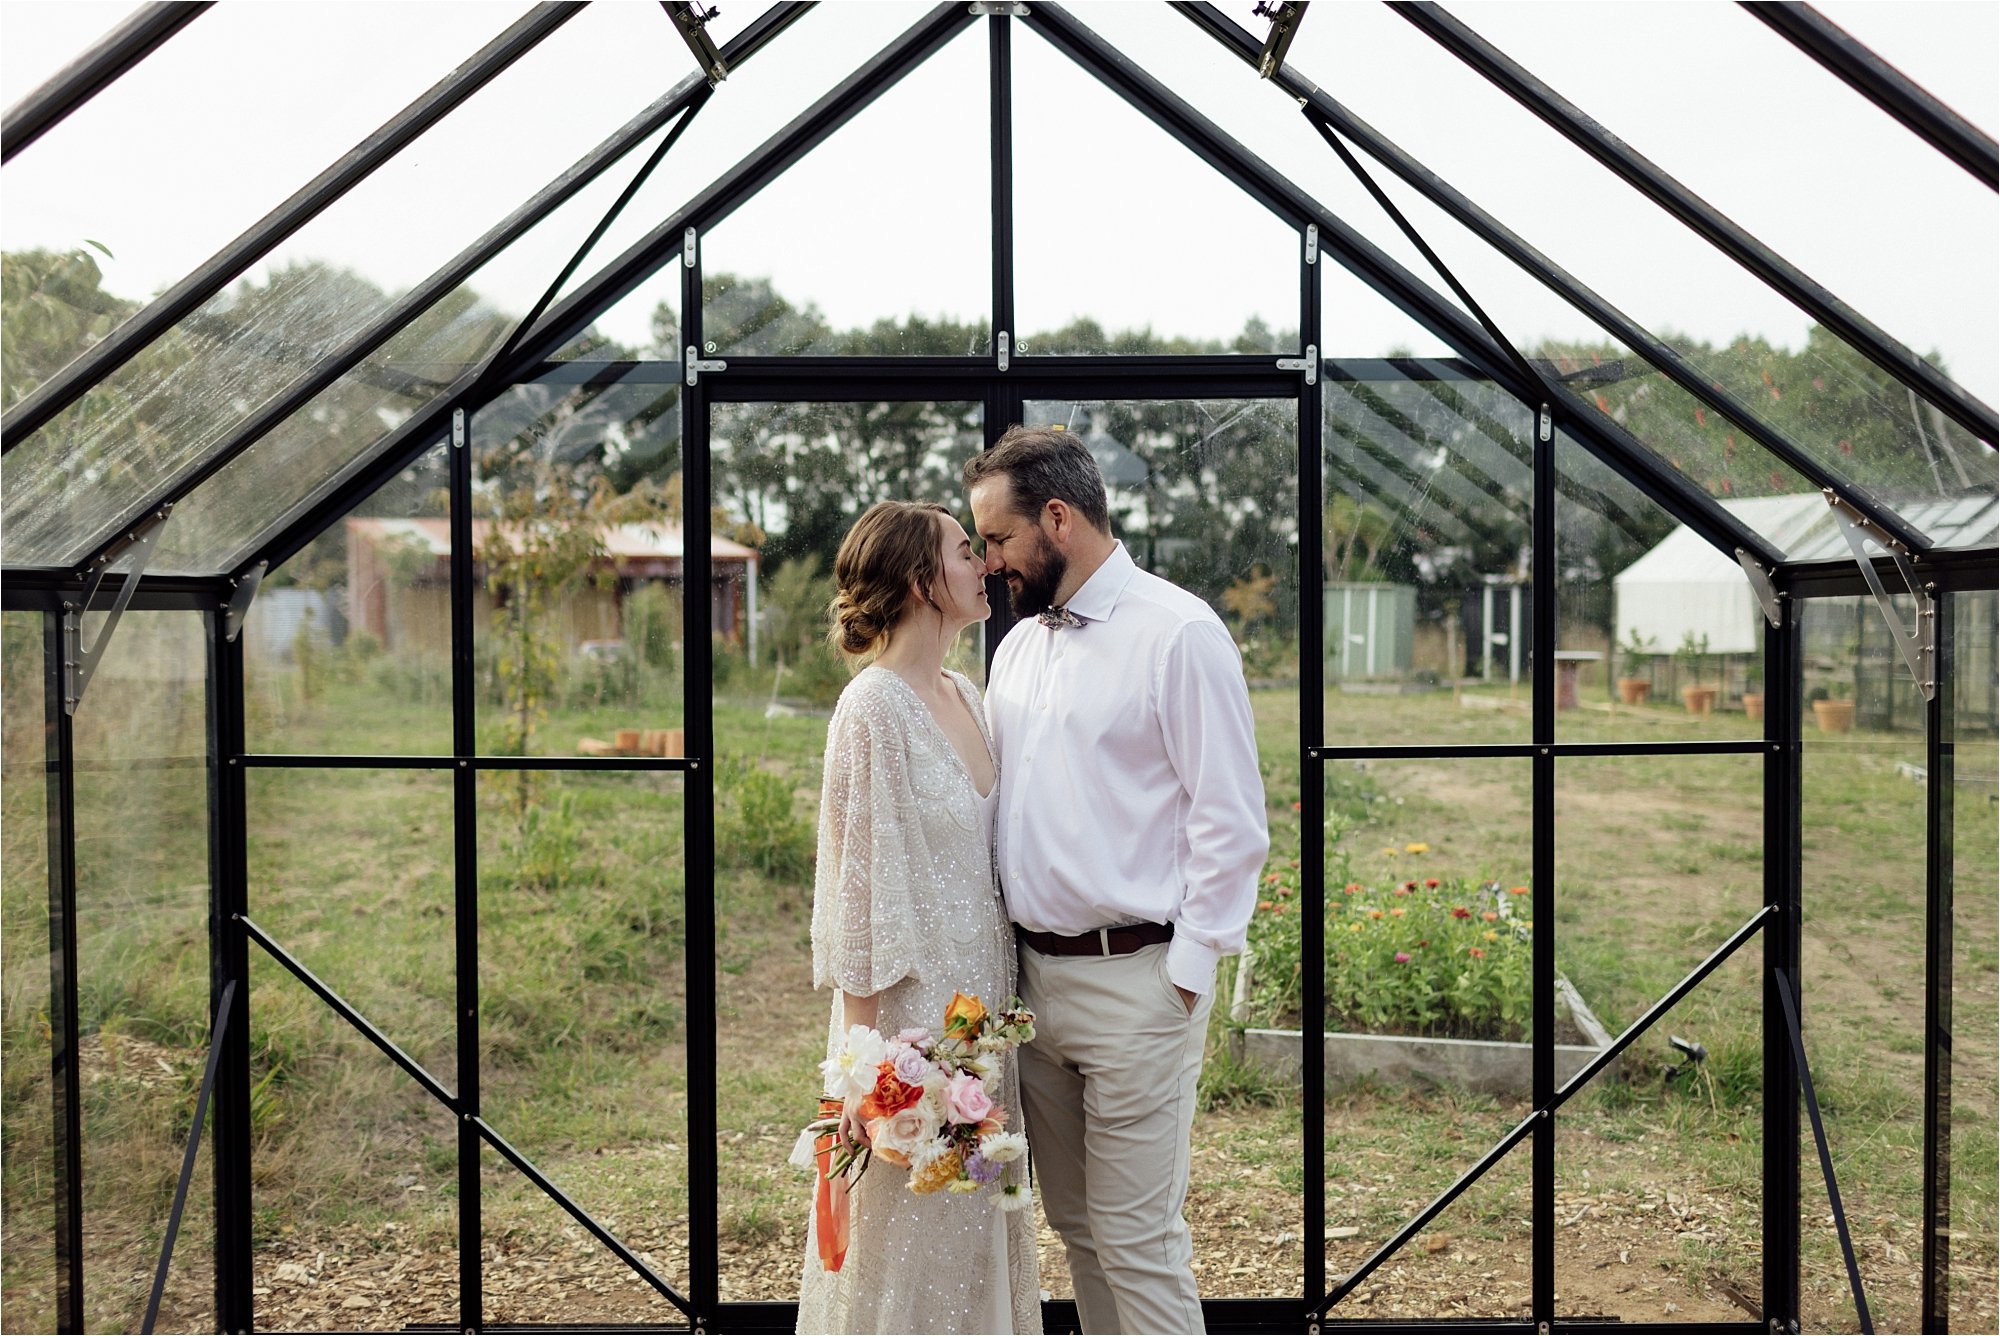  Bride and Groom standing together in a glasshouse  on their wedding day 